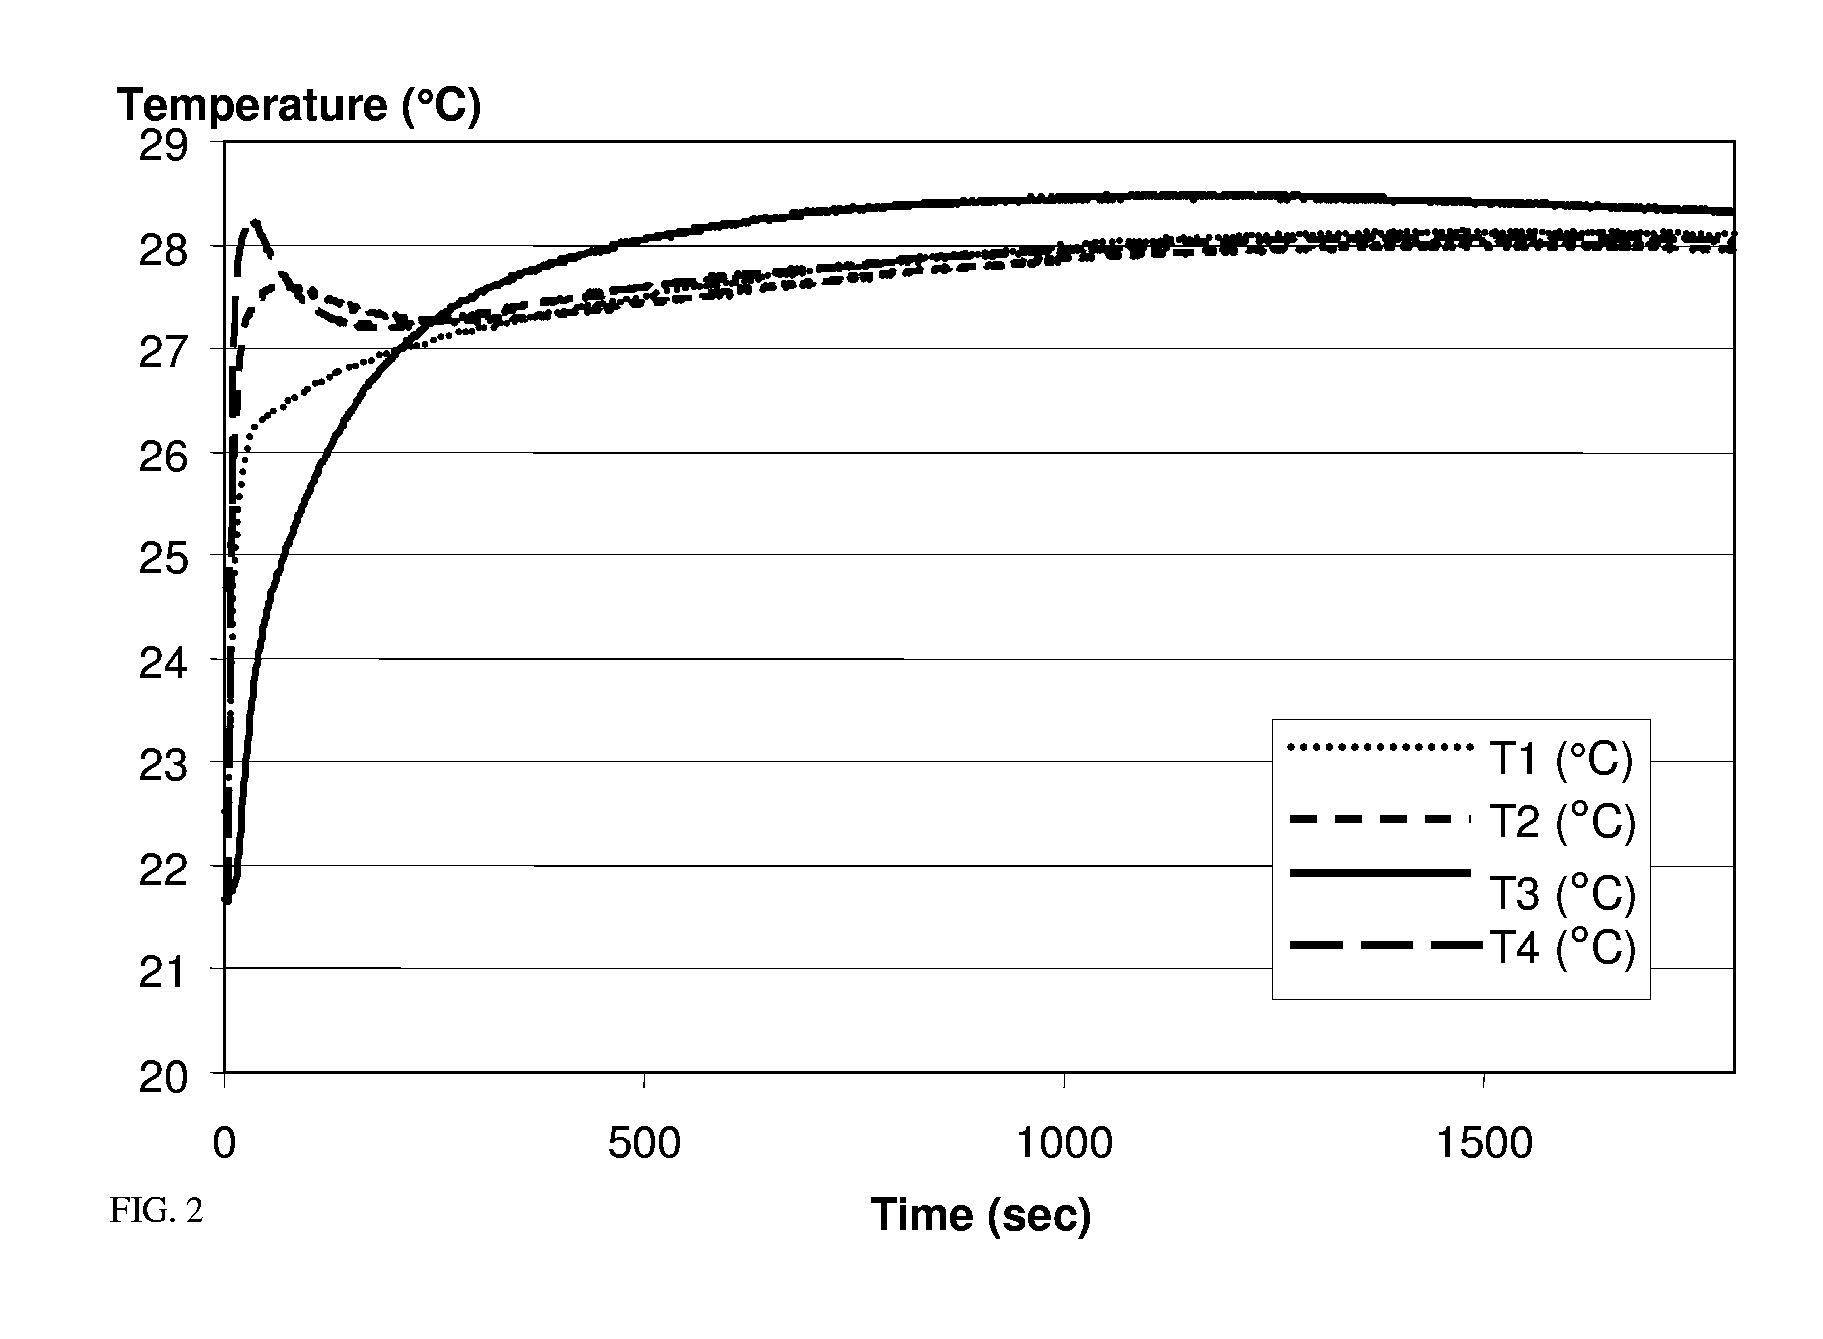 Self-Heating Chemical System for Sustained Modulation of Temperature